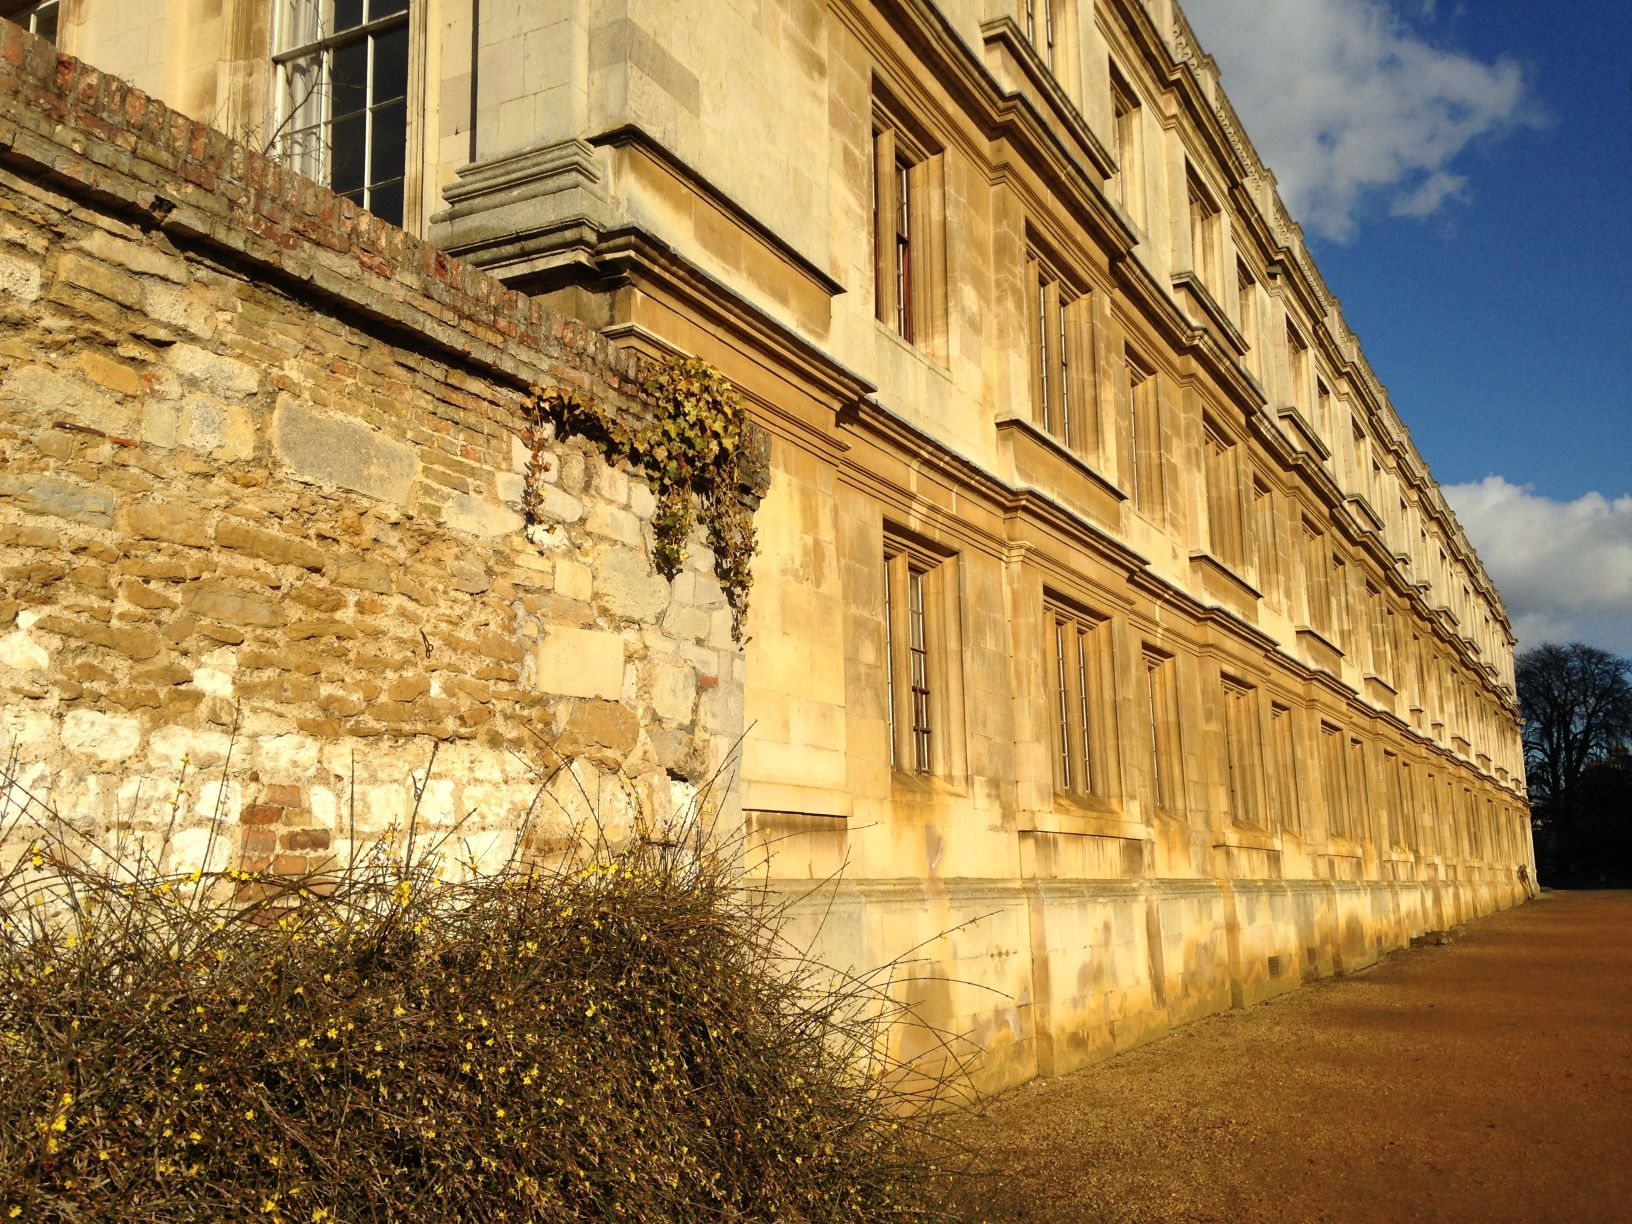 Image of Clare College Old Court bathed in afternoon sunlight, the Ketton limestone building stones are yellowy-beige